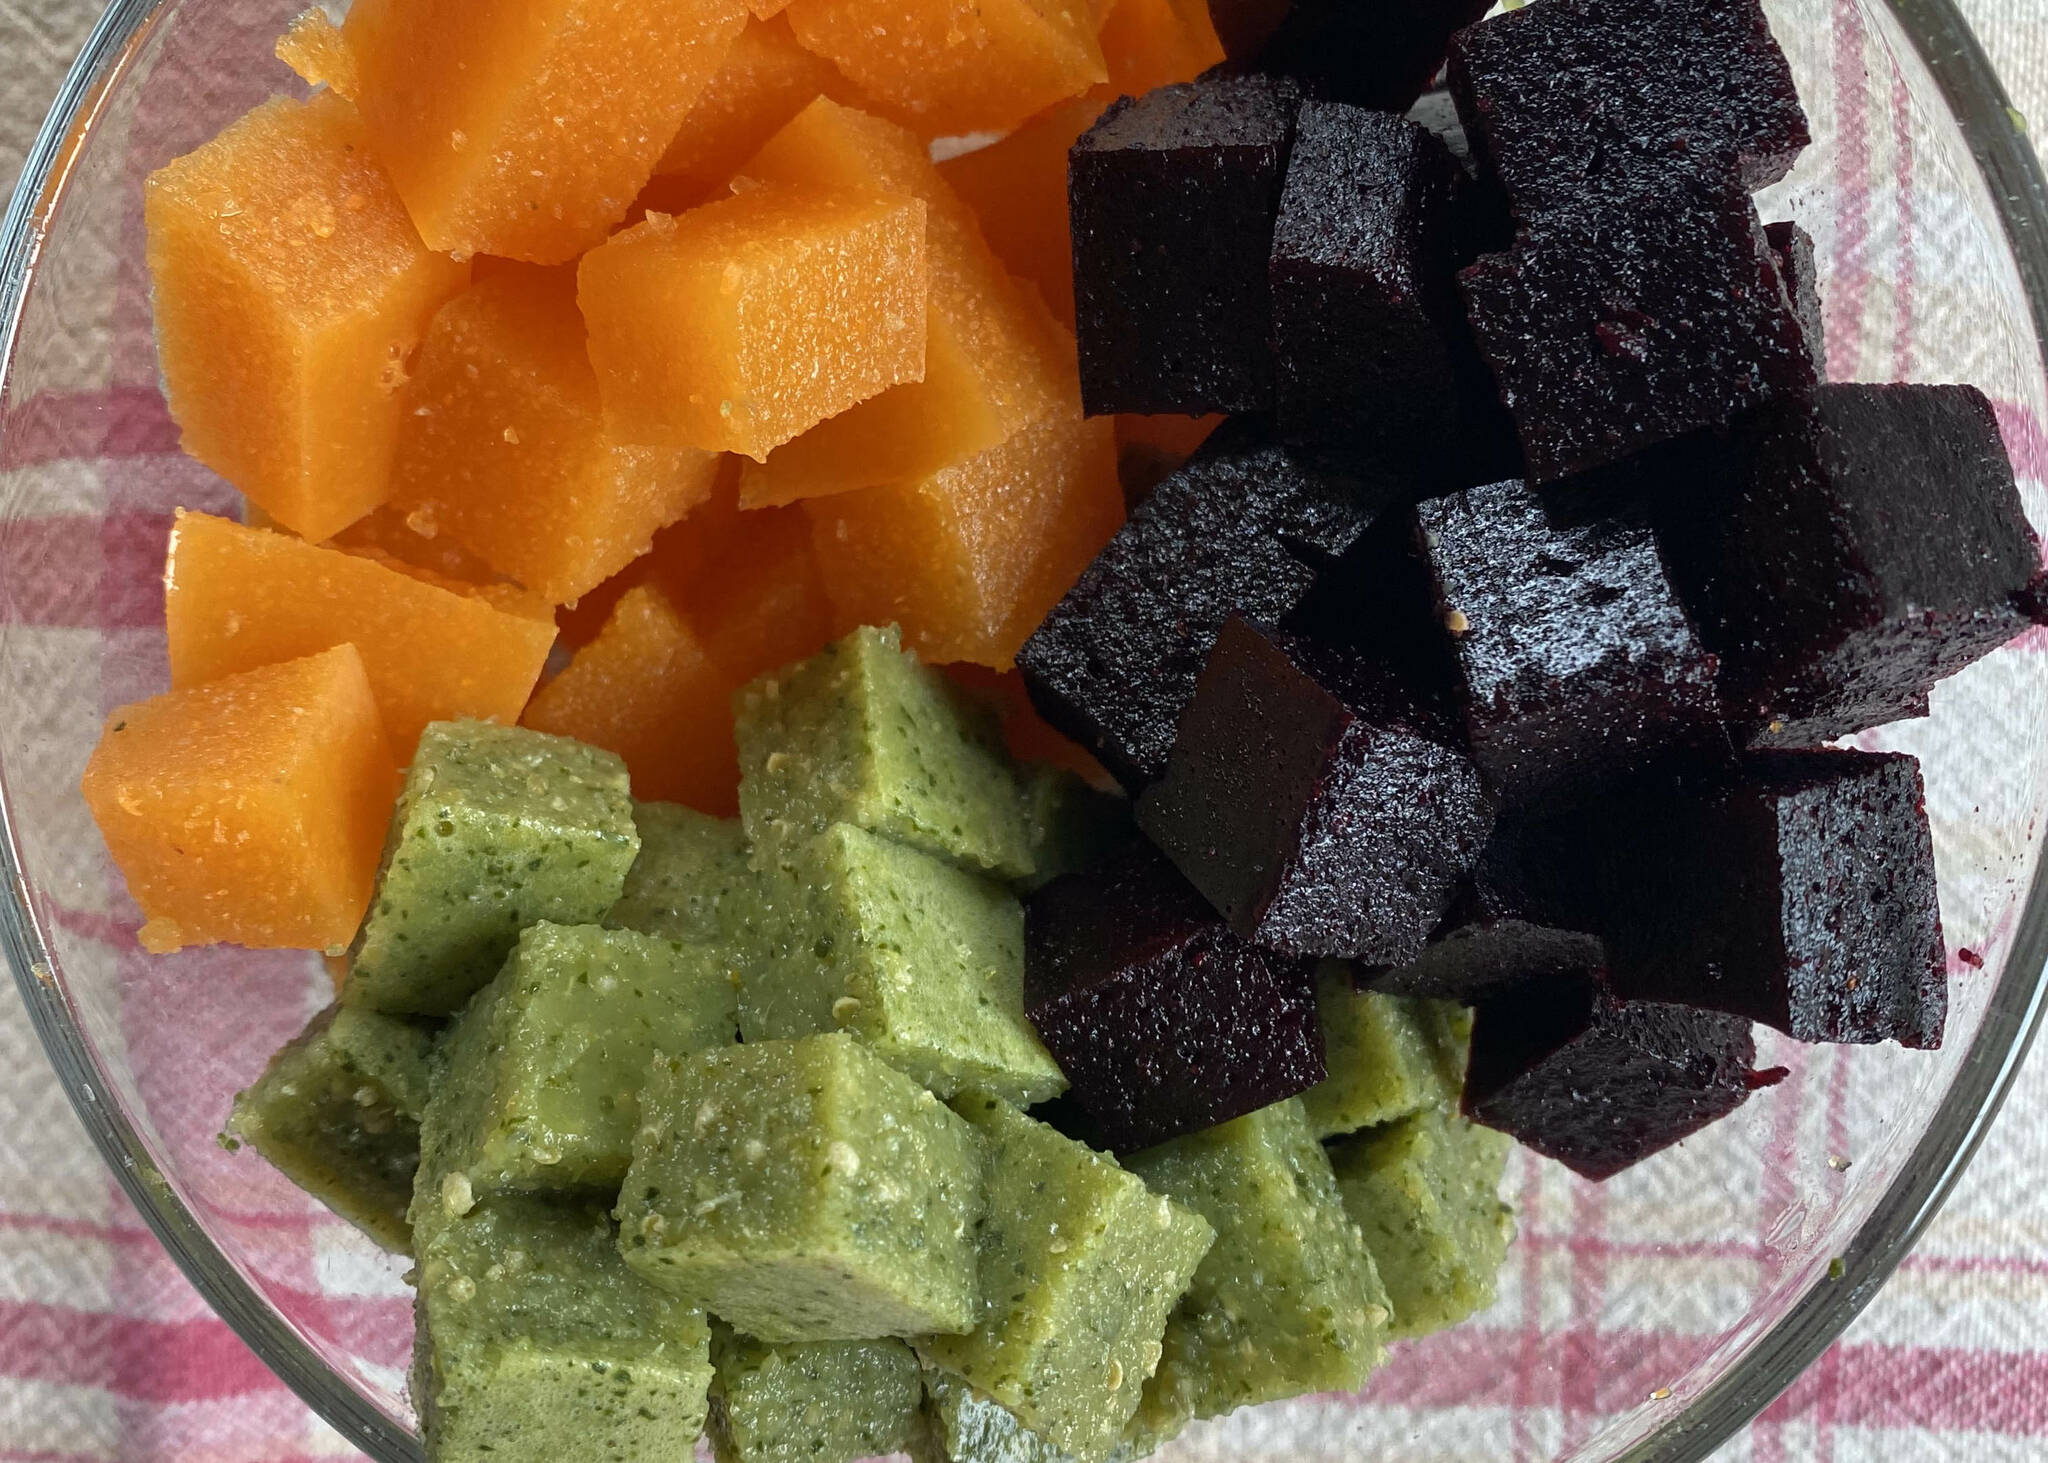 These blueberry and honey, carrot and nectarine, and spinach and green grape gummies are made with minimal sugar and no artificial dyes or preservatives. (Photo by Tressa Dale/Peninsula Clarion)